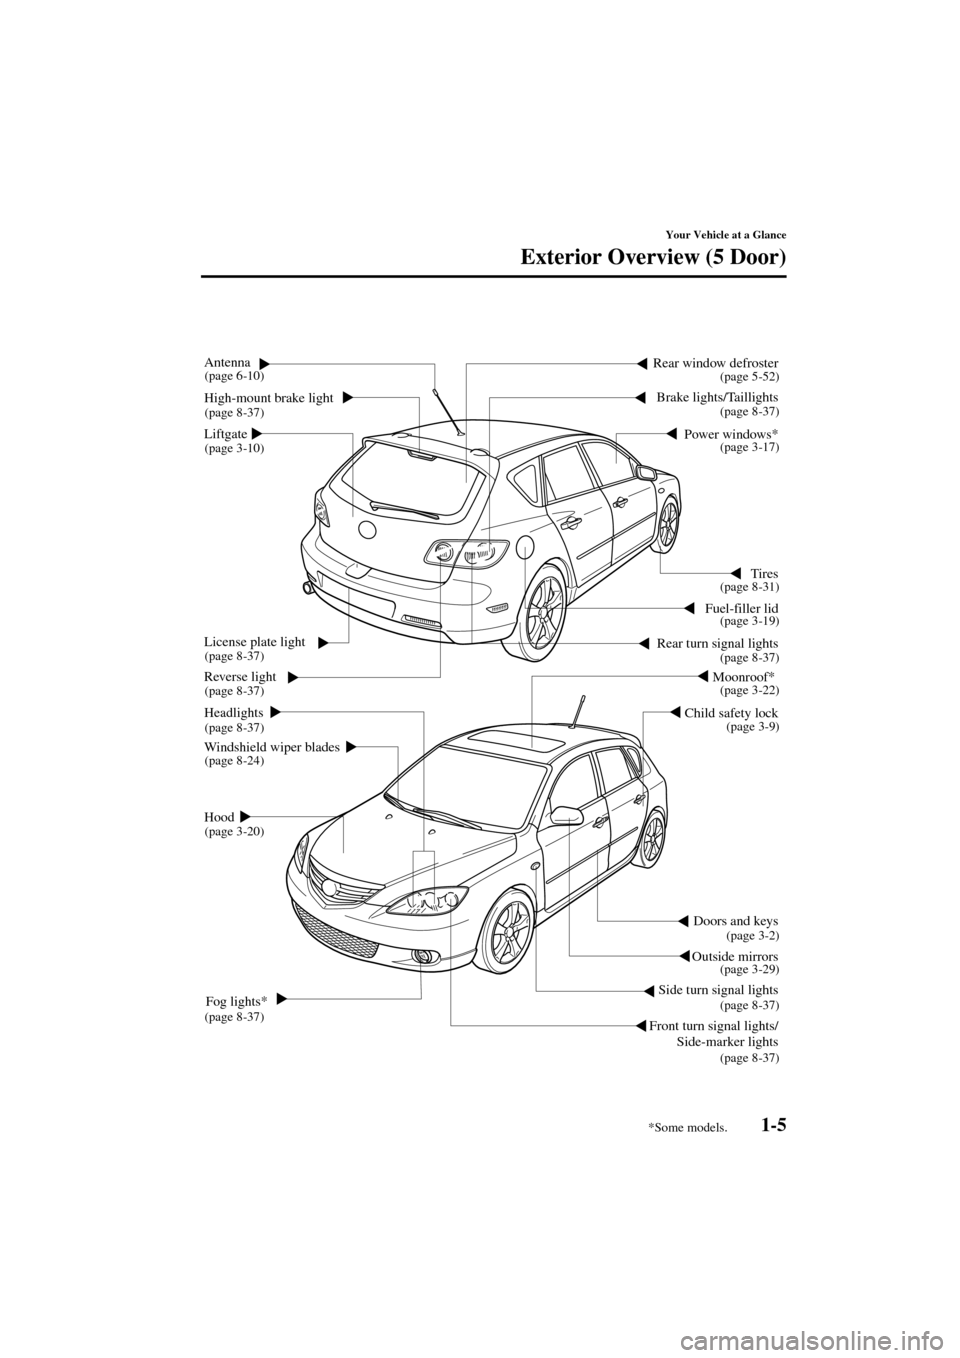 MAZDA MODEL 3 HATCHBACK 2004   (in English) User Guide 1-5
Your Vehicle at a Glance
Form No. 8S18-EA-03I
Exterior Overview (5 Door)
Doors and keys
Outside mirrors
Side turn signal lights HeadlightsFuel-filler lid
Child safety lockTires
Reverse light
Winds